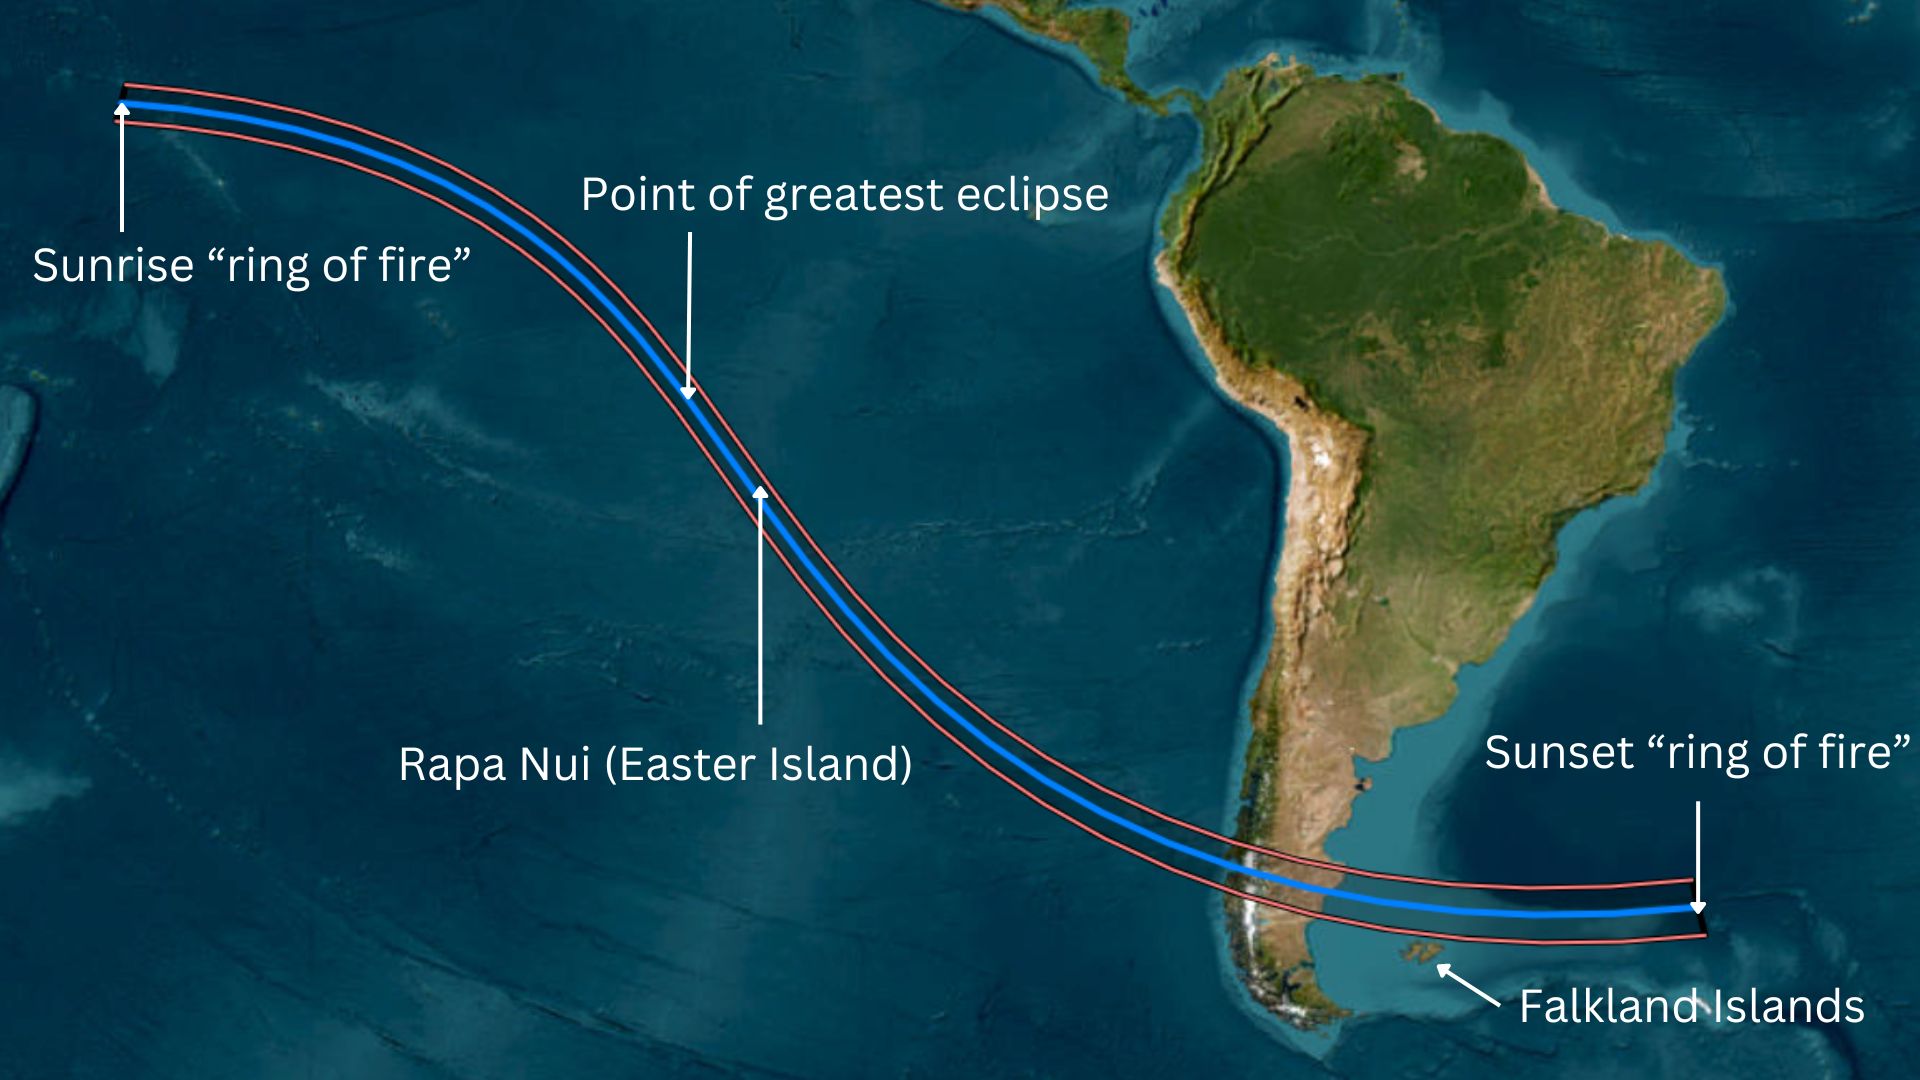 a map of south america and the pacific ocean showing the path of the annular solar eclipse passing over rapa nui (easter island) and across south america through chile and argentina.